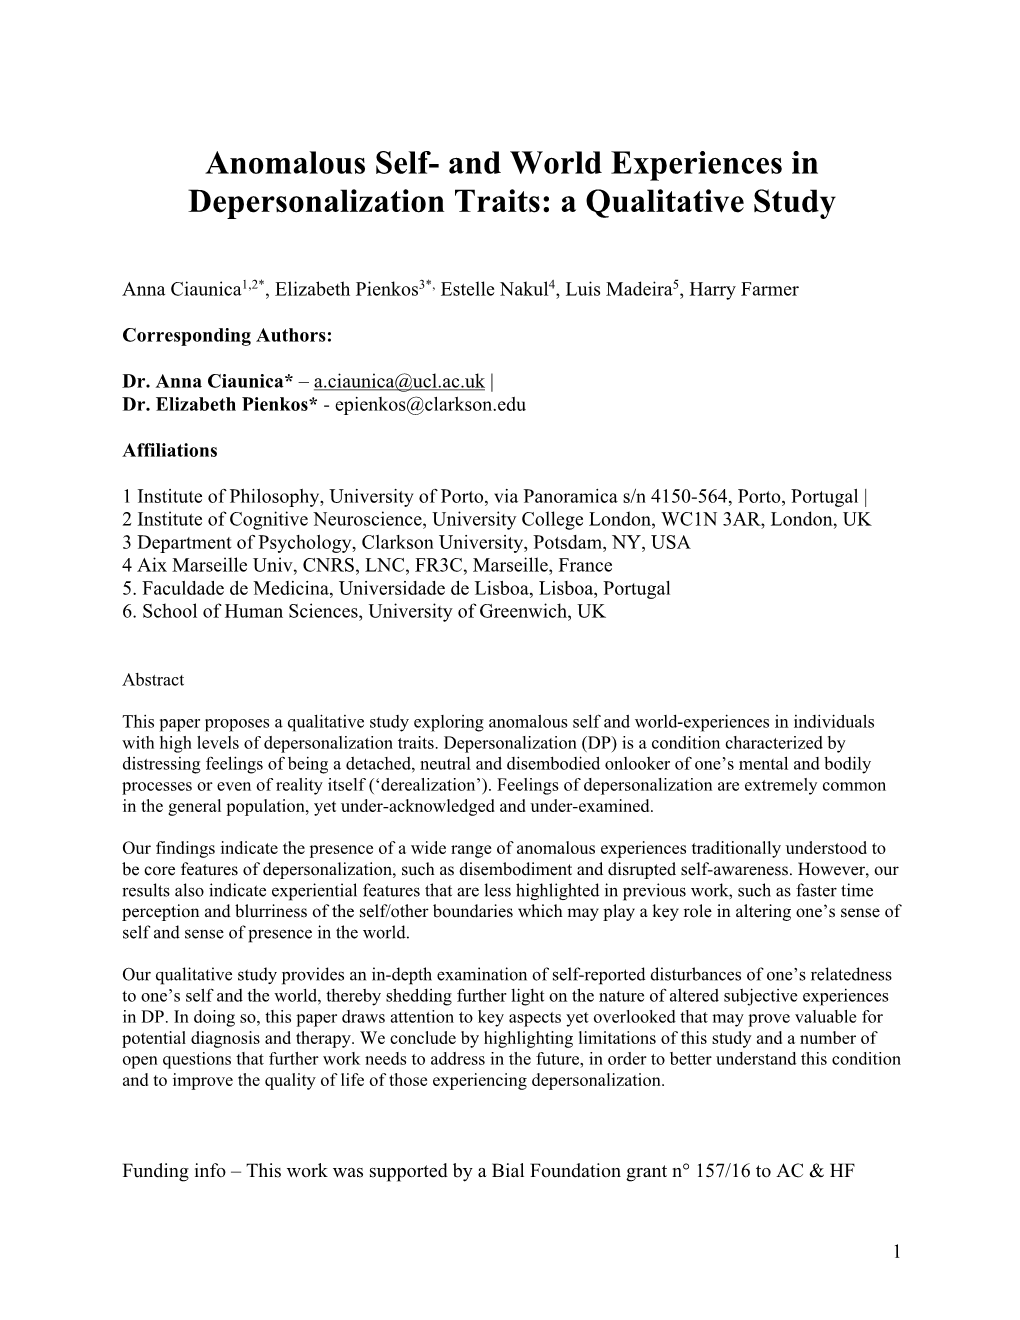 Anomalous Self- and World Experiences in Depersonalization Traits: a Qualitative Study